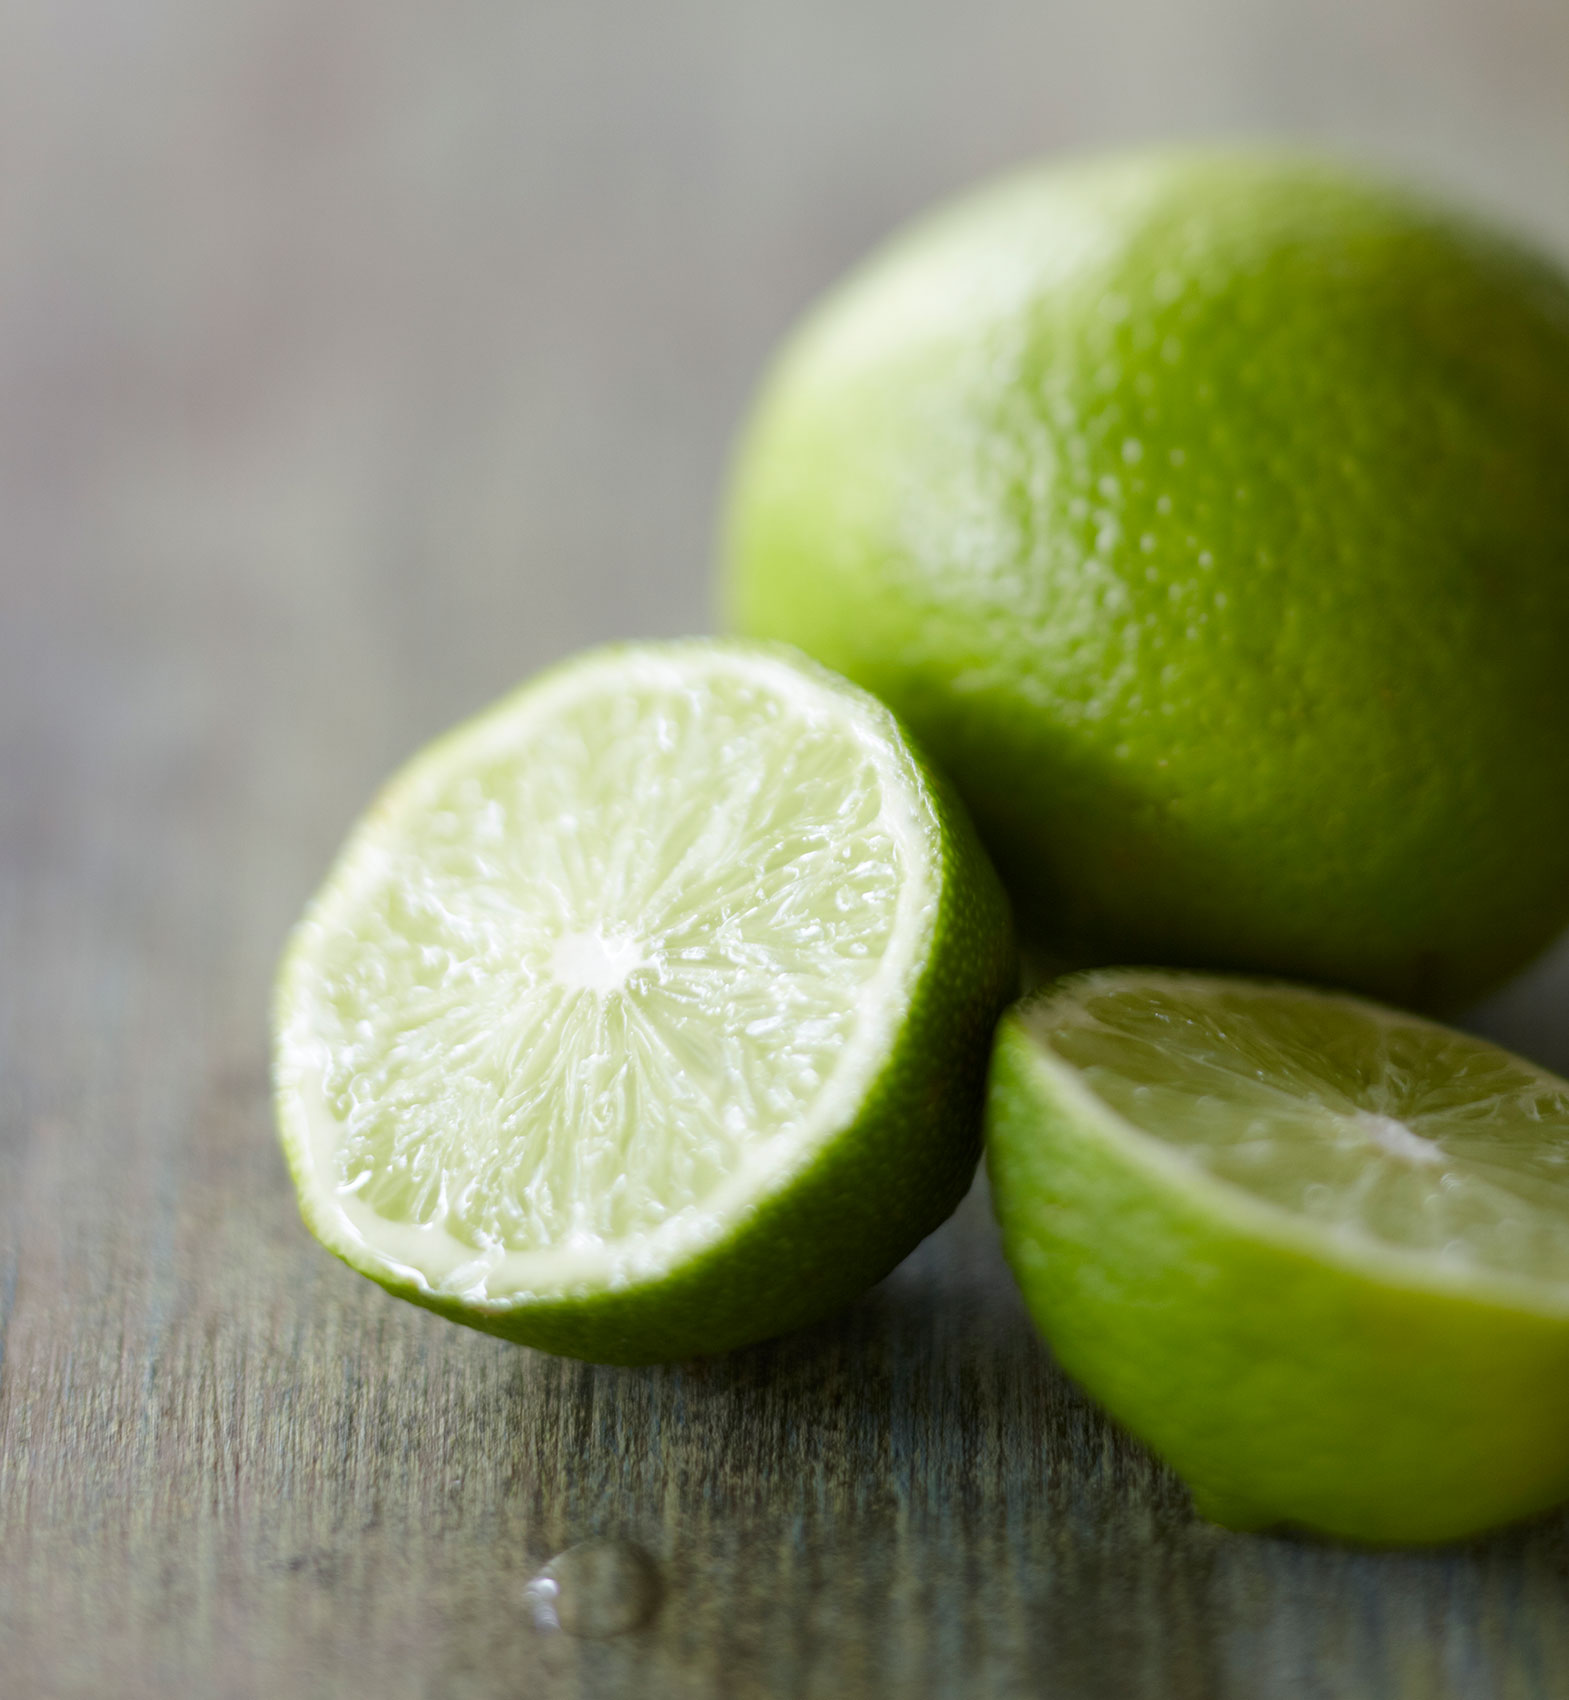 Everyday • Freshly Cut Green Limes on Dark Wooden Bench • Hospitality & Editorial Food Photography